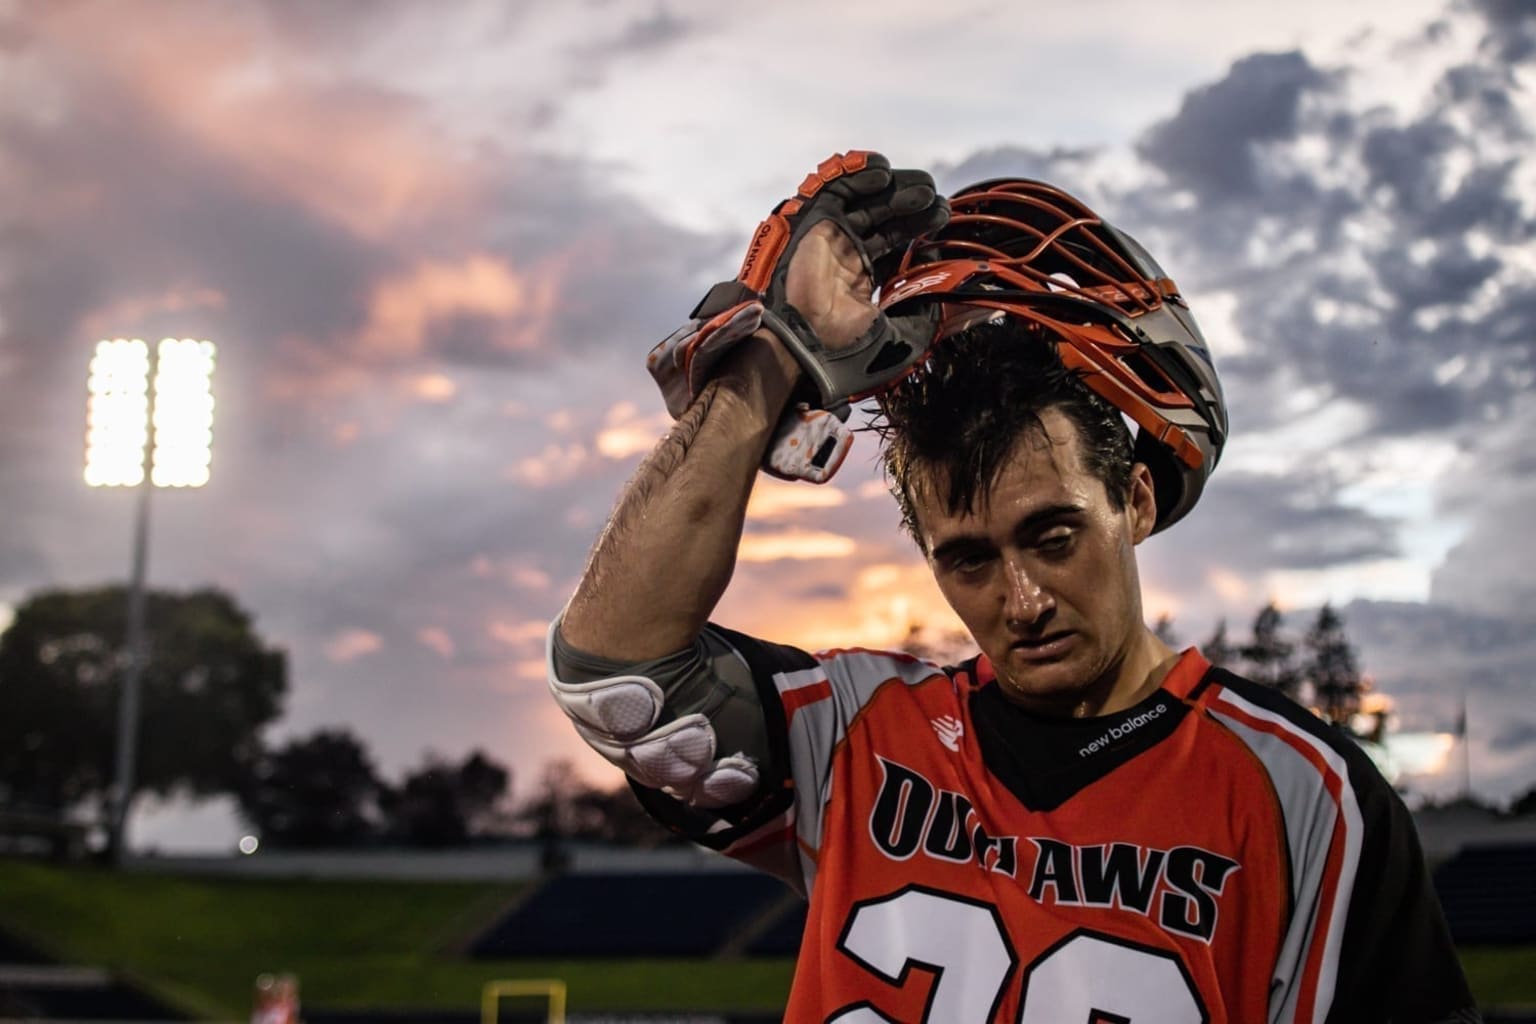 MLL Champions Crowned Today, Denver Outlaws or Boston Cannons